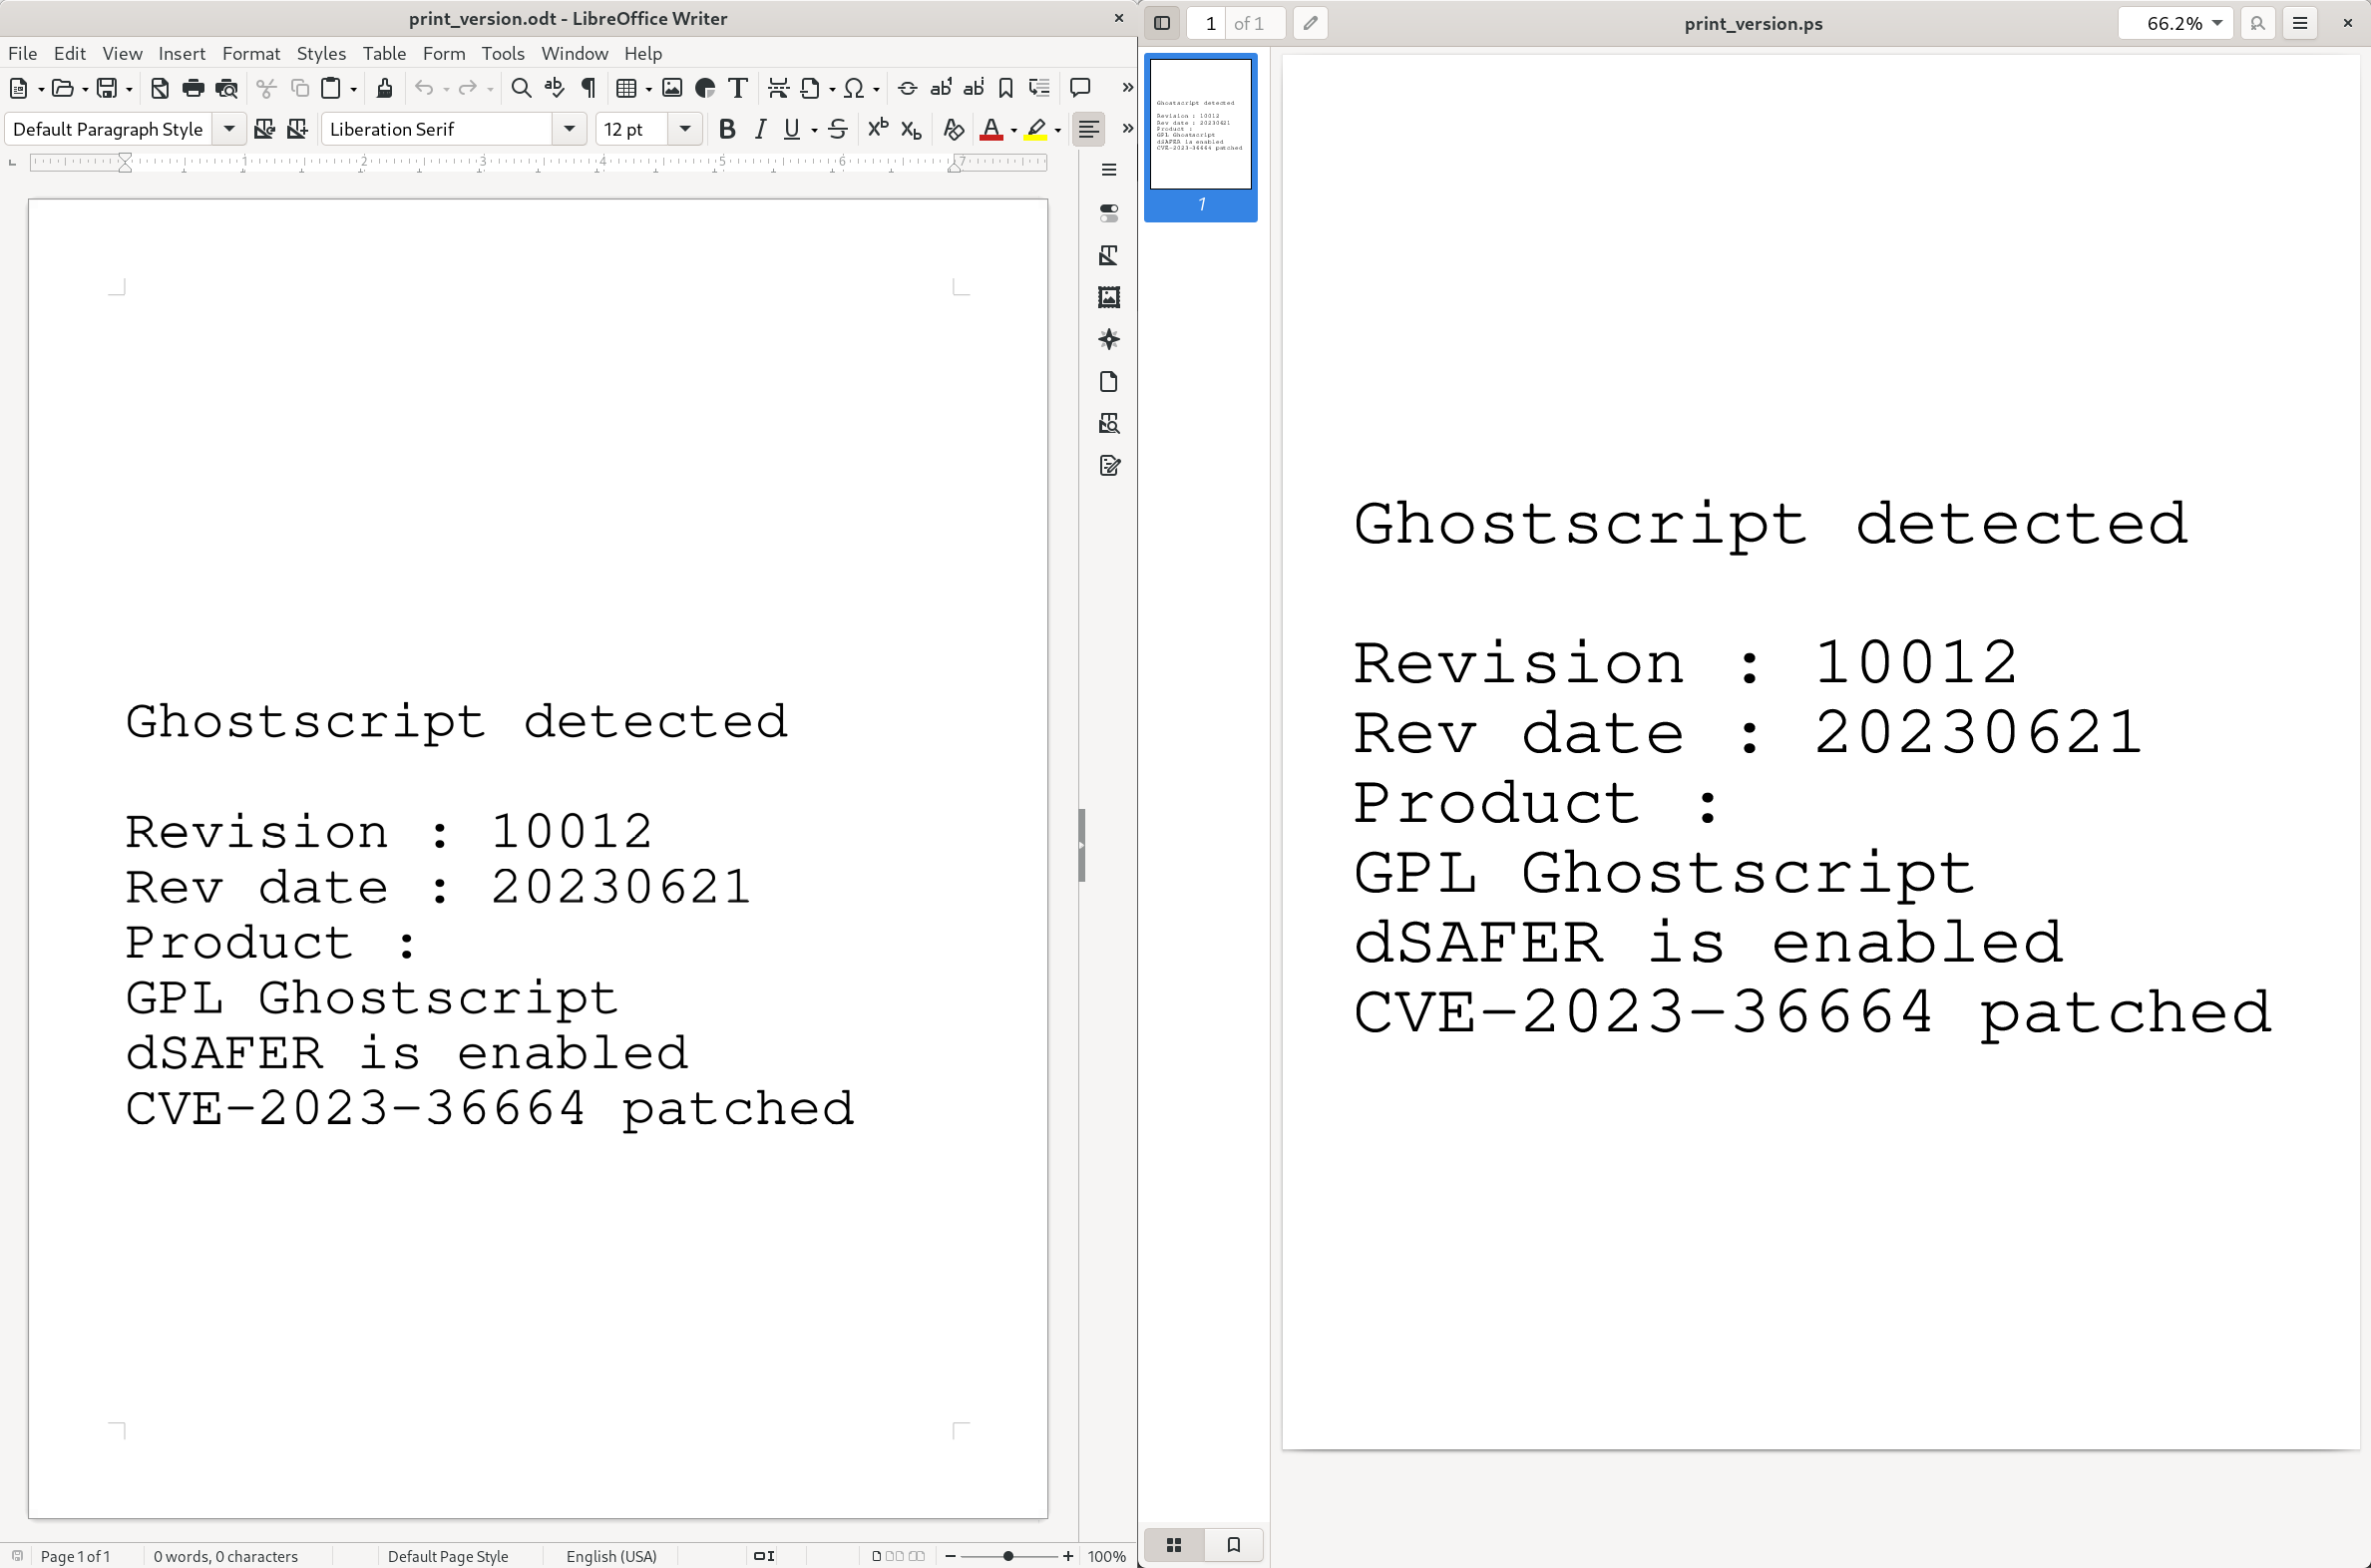 Screenshot showing two documents side-by-side, left one is showing a LibreOffice Writer document with the text 'Ghostscript detected, Revision: 10012, Rev date: 20230621, Product: GPL Ghostscript, dSAFER is enabled, CVE-2023-36664 patched', the right document is opened in Evince, showing the sam text as the LibreOffice document